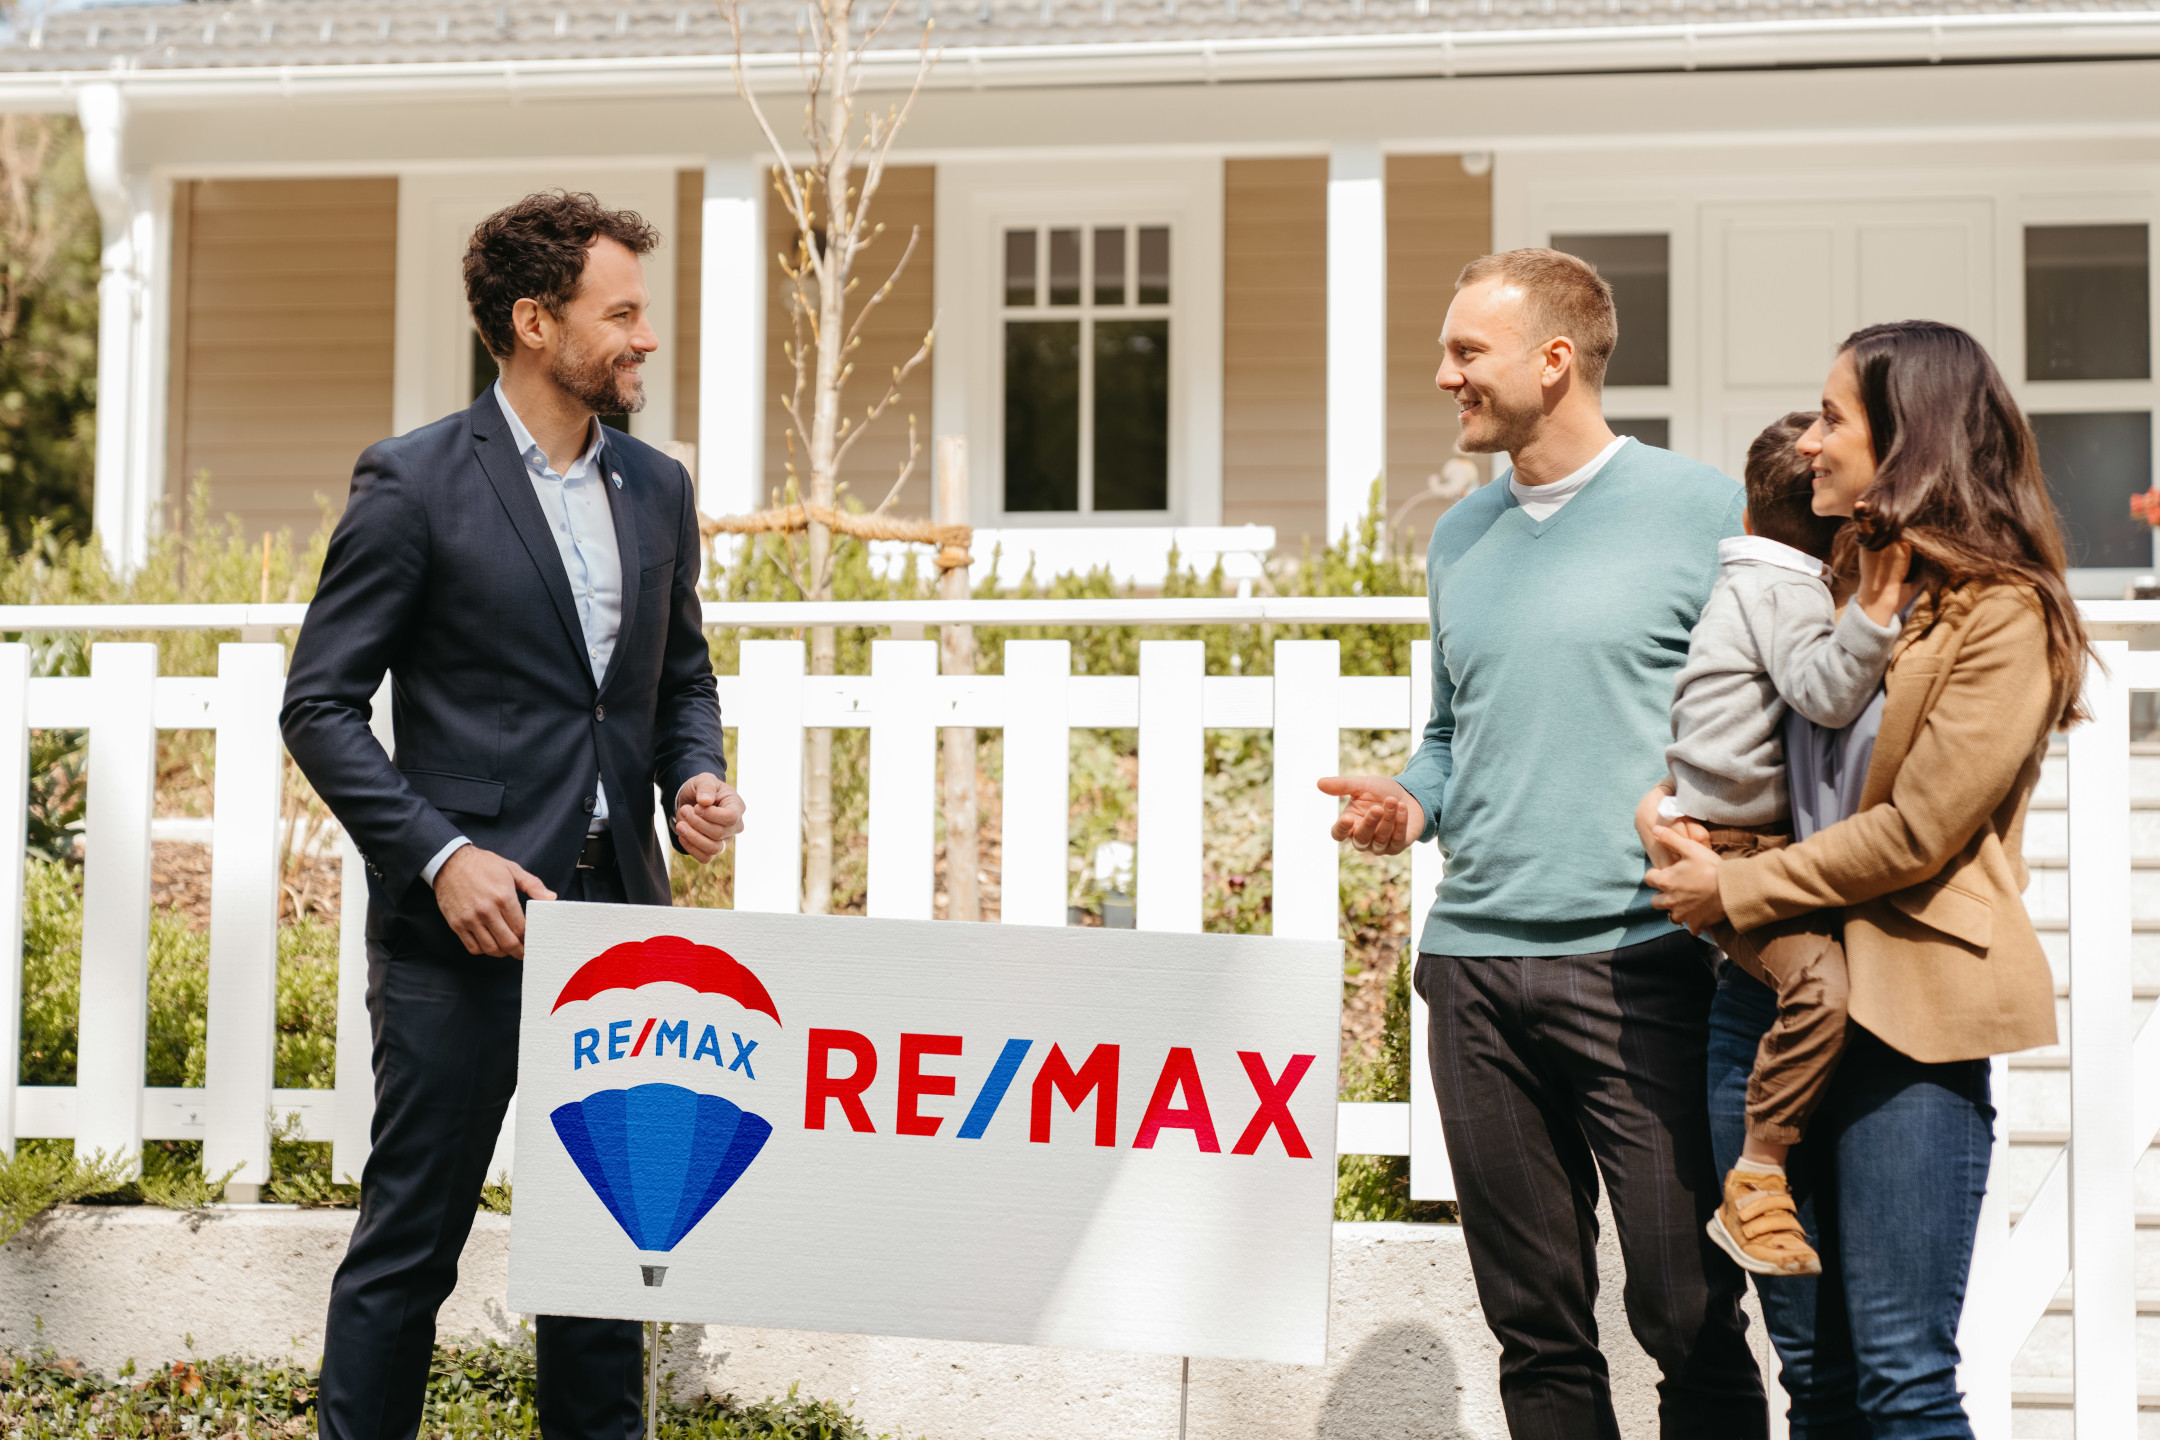 OPEN HOUSE from RE/MAX Properties Investment, Saturday 20/6/2020 in Neos Kosmos